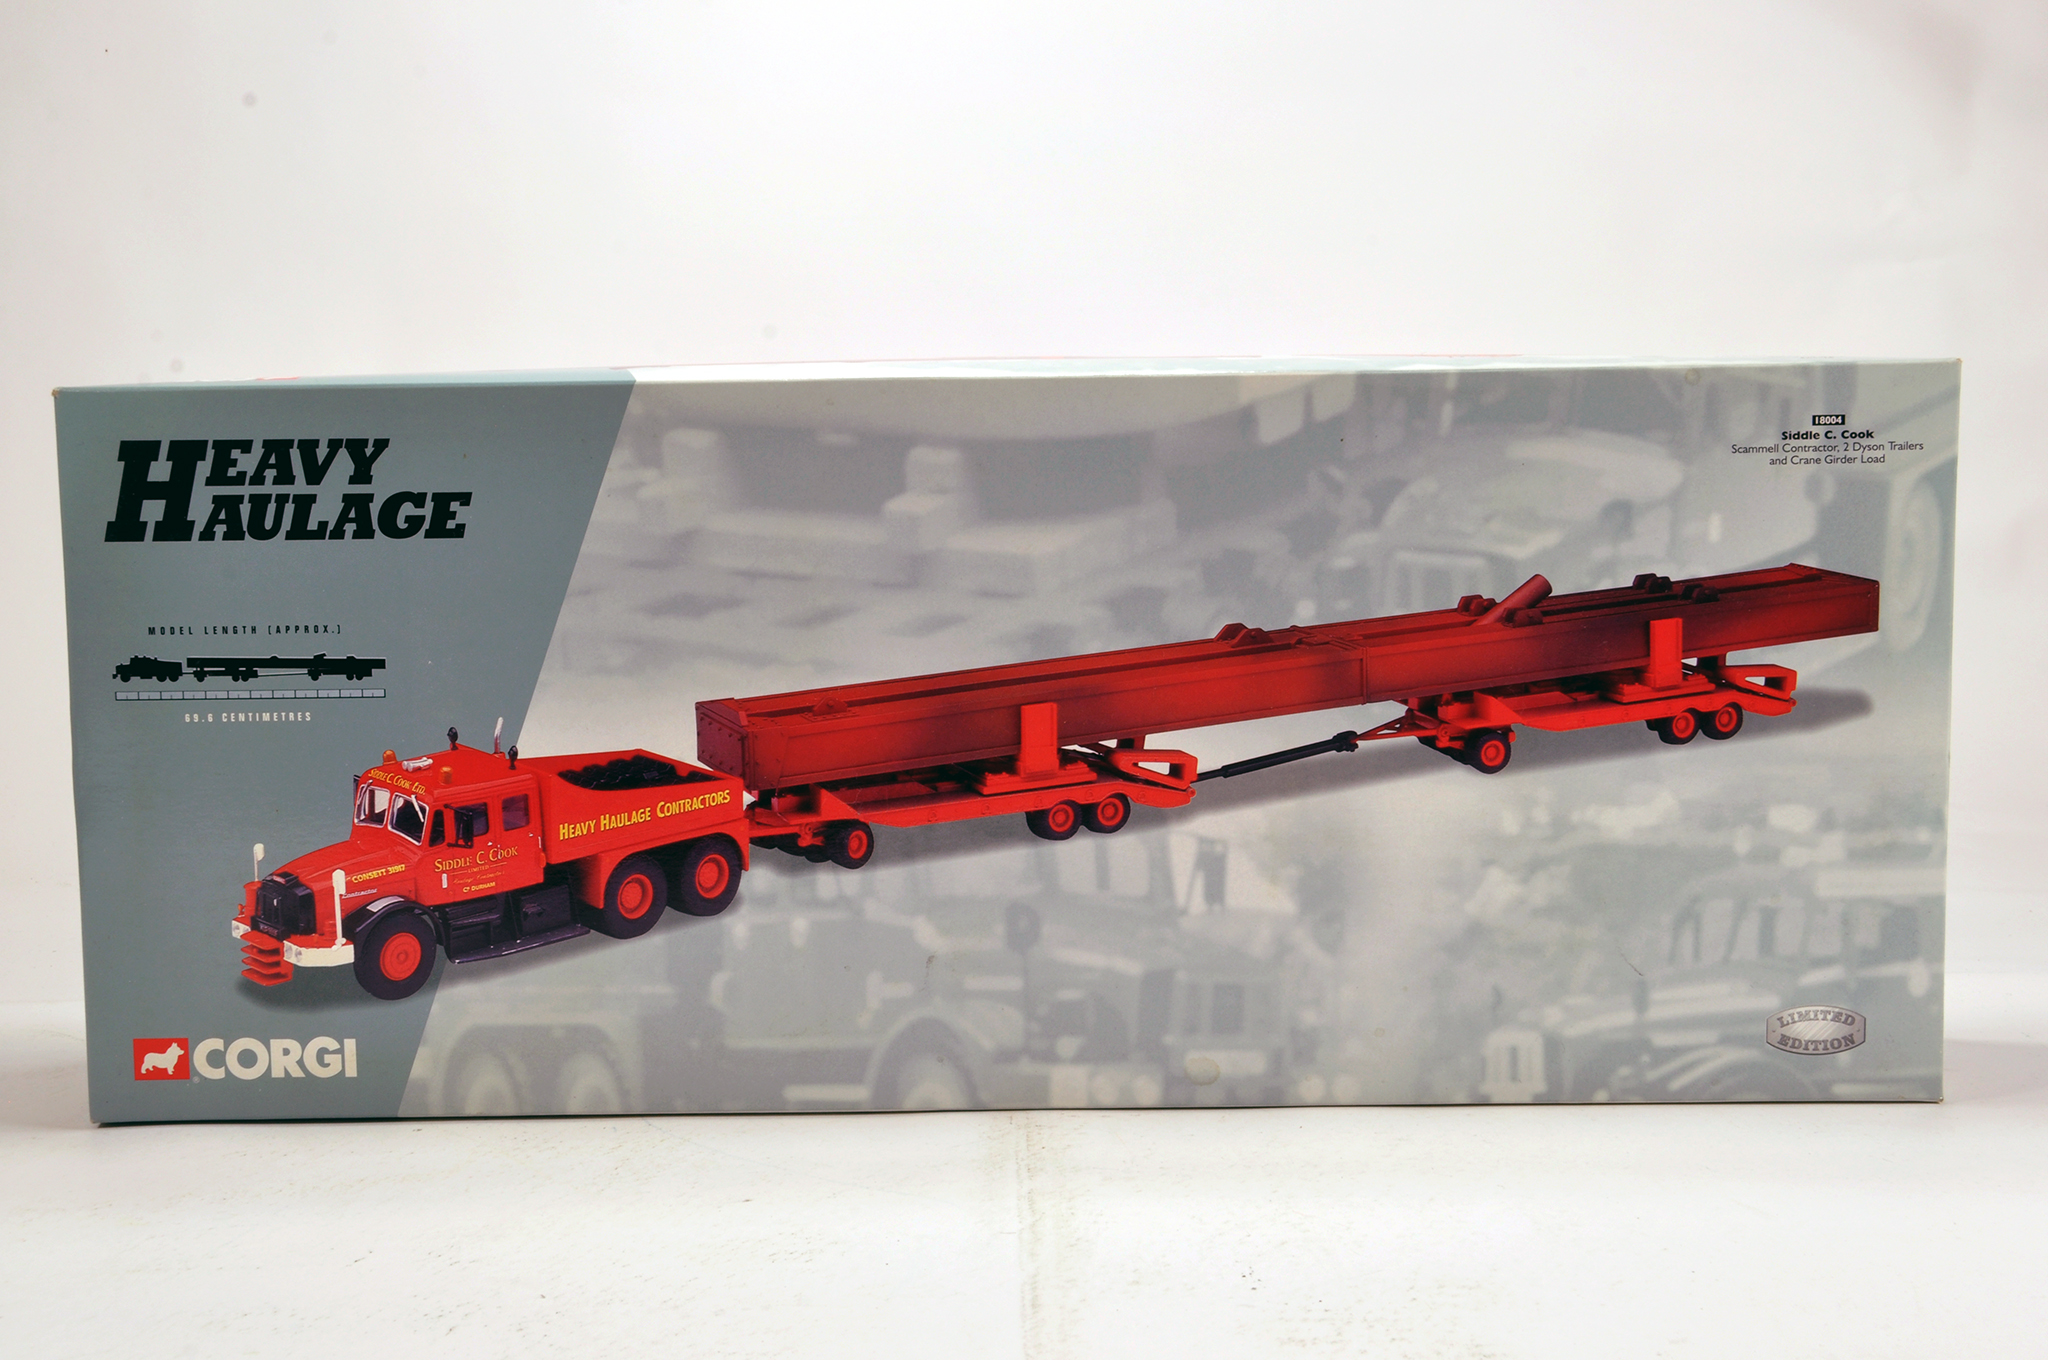 Corgi 1/50 diecast truck issue comprising Heavy Haulage No. 18004 Scammell Contractor and Dyson